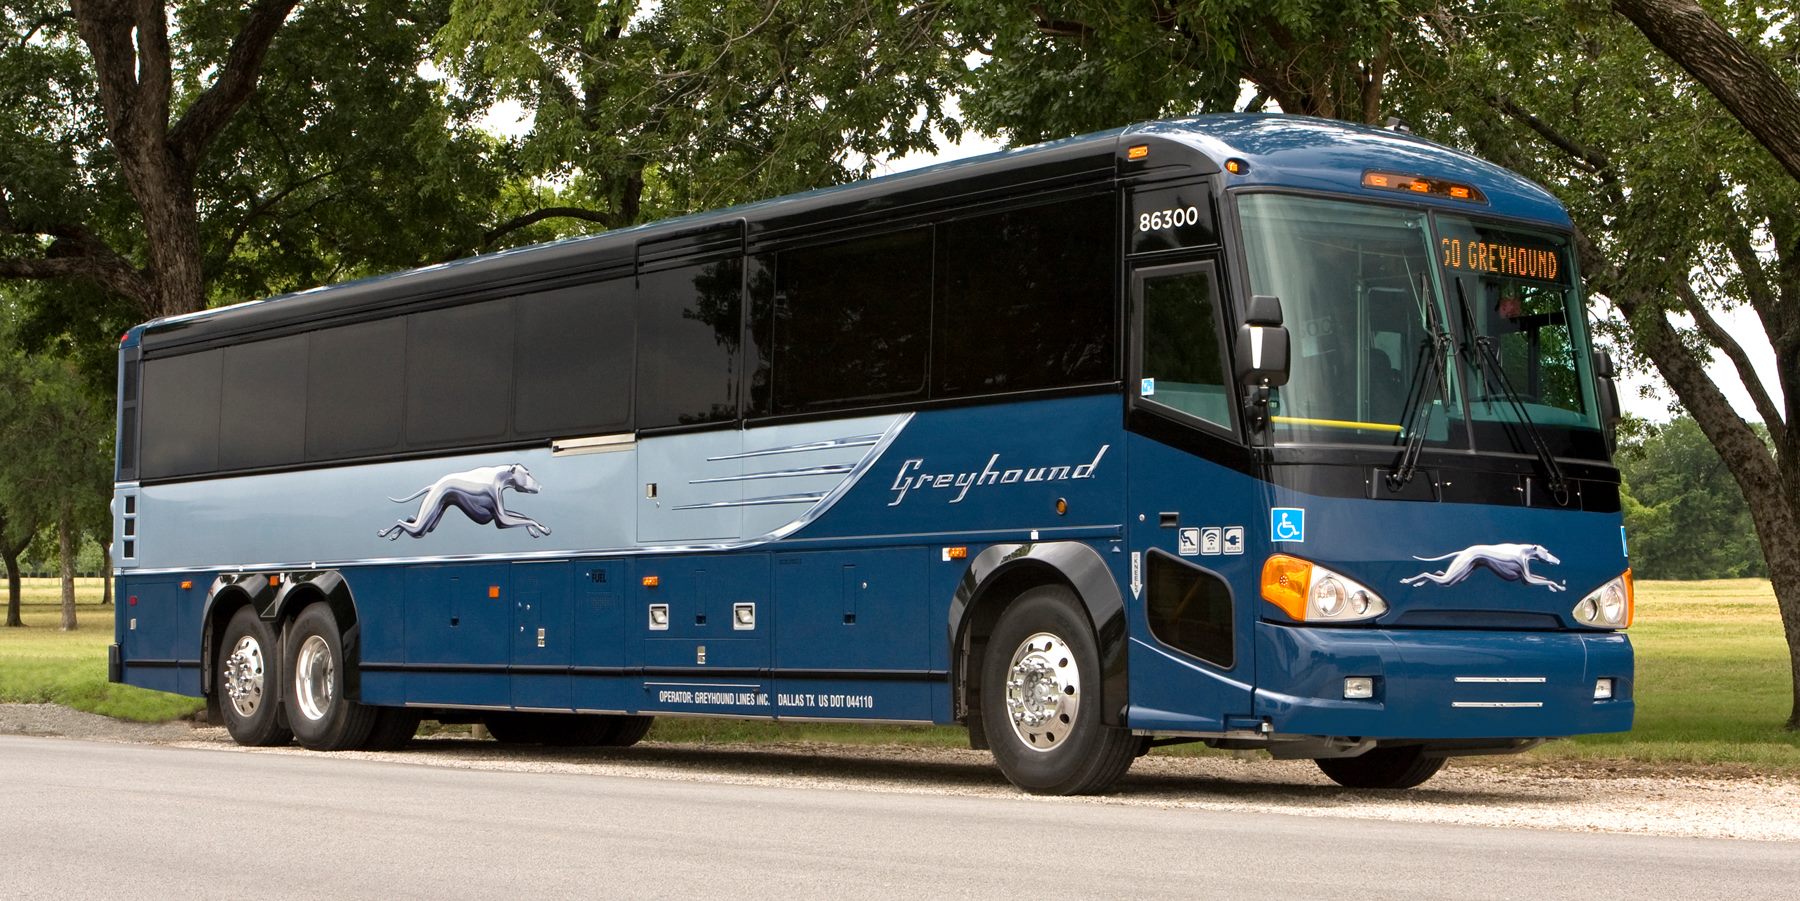 Greyhound Promo Codes & Discounts: How To Save Every Time